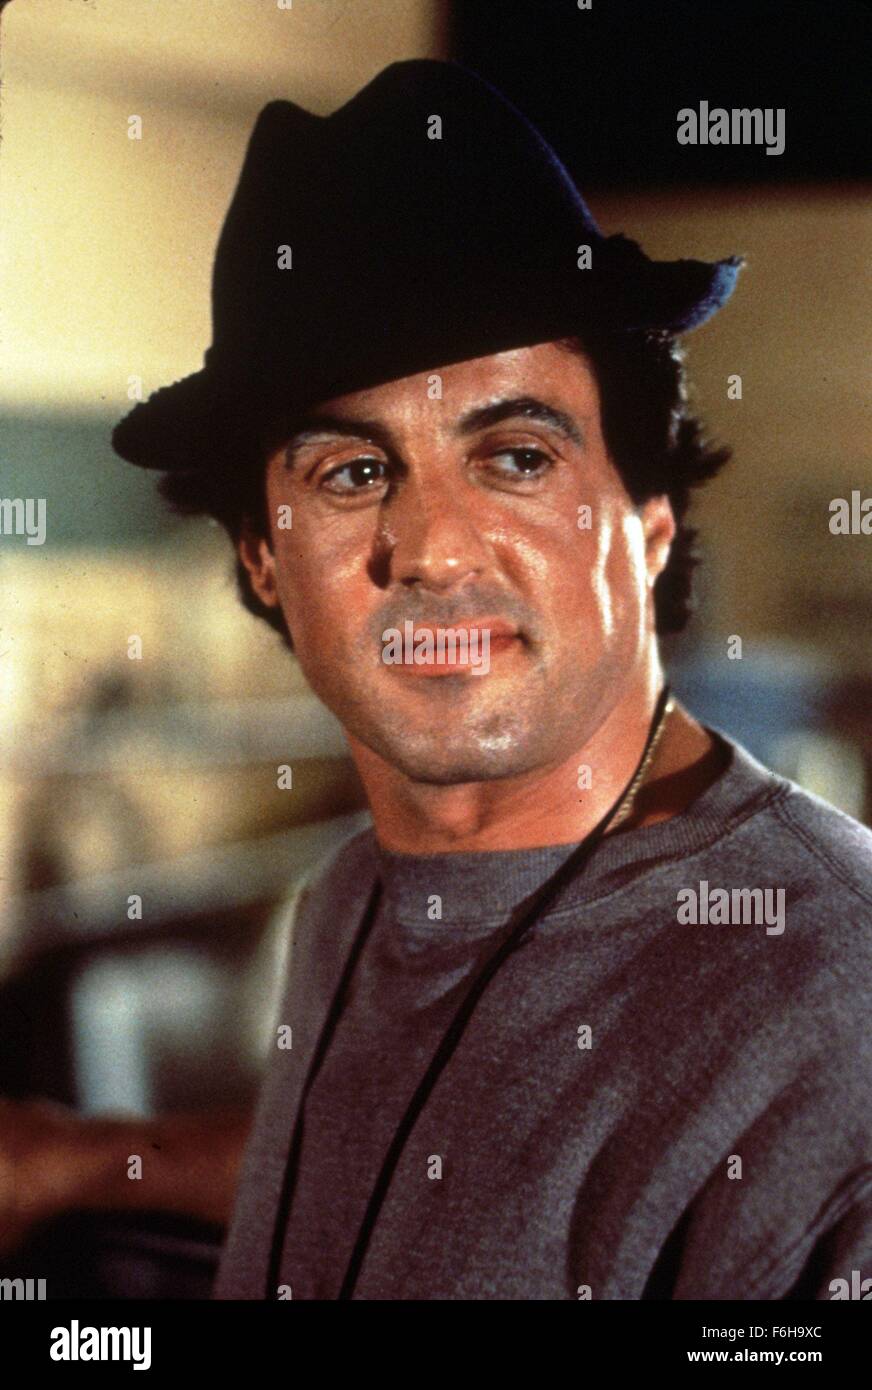 RELEASE DATE: November 16, 1990  TITLE: Rocky V  STUDIO: United Artists  DIRECTOR: John G. Avildsen  PLOT: Reluctantly retired from boxing and back from riches to rags, Rocky takes on a new protege who betrays him; As the champ's son must adjust to his family's new life after bankruptcy.  PICTURED: SYLVESTER STALLONE as Rocky Balboa.  (Credit Image: c United Artists/Entertainment Pictures) Stock Photo